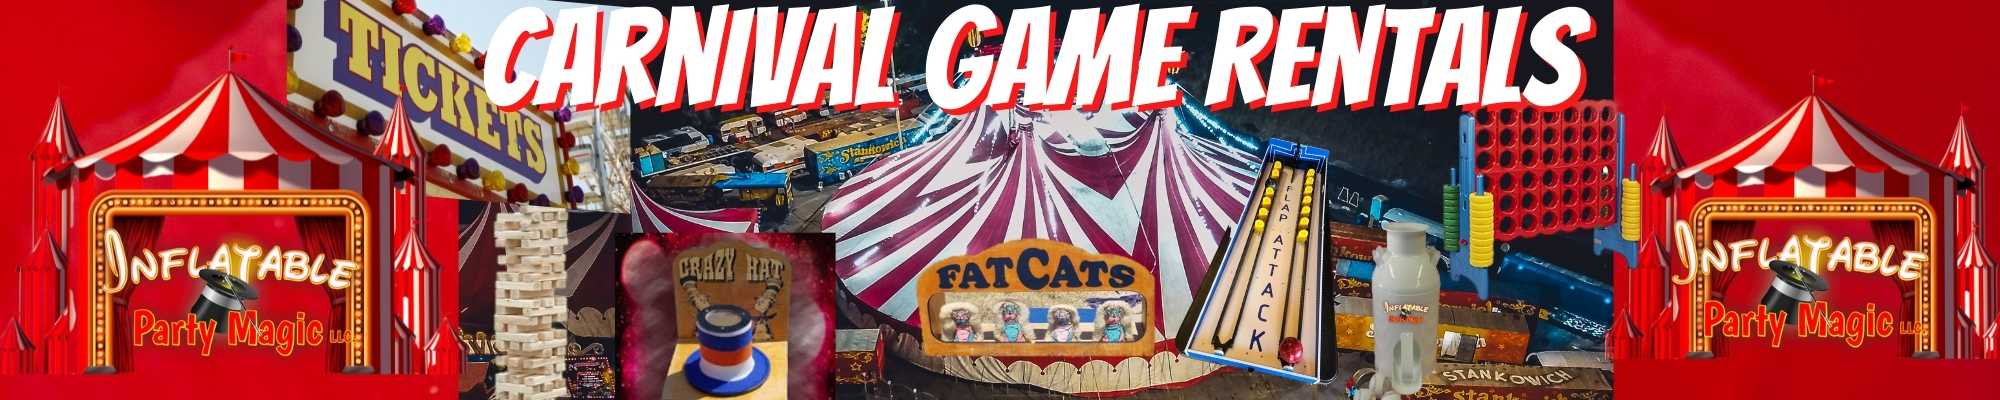 Carnival Game Rentals and Giant Game Rentals